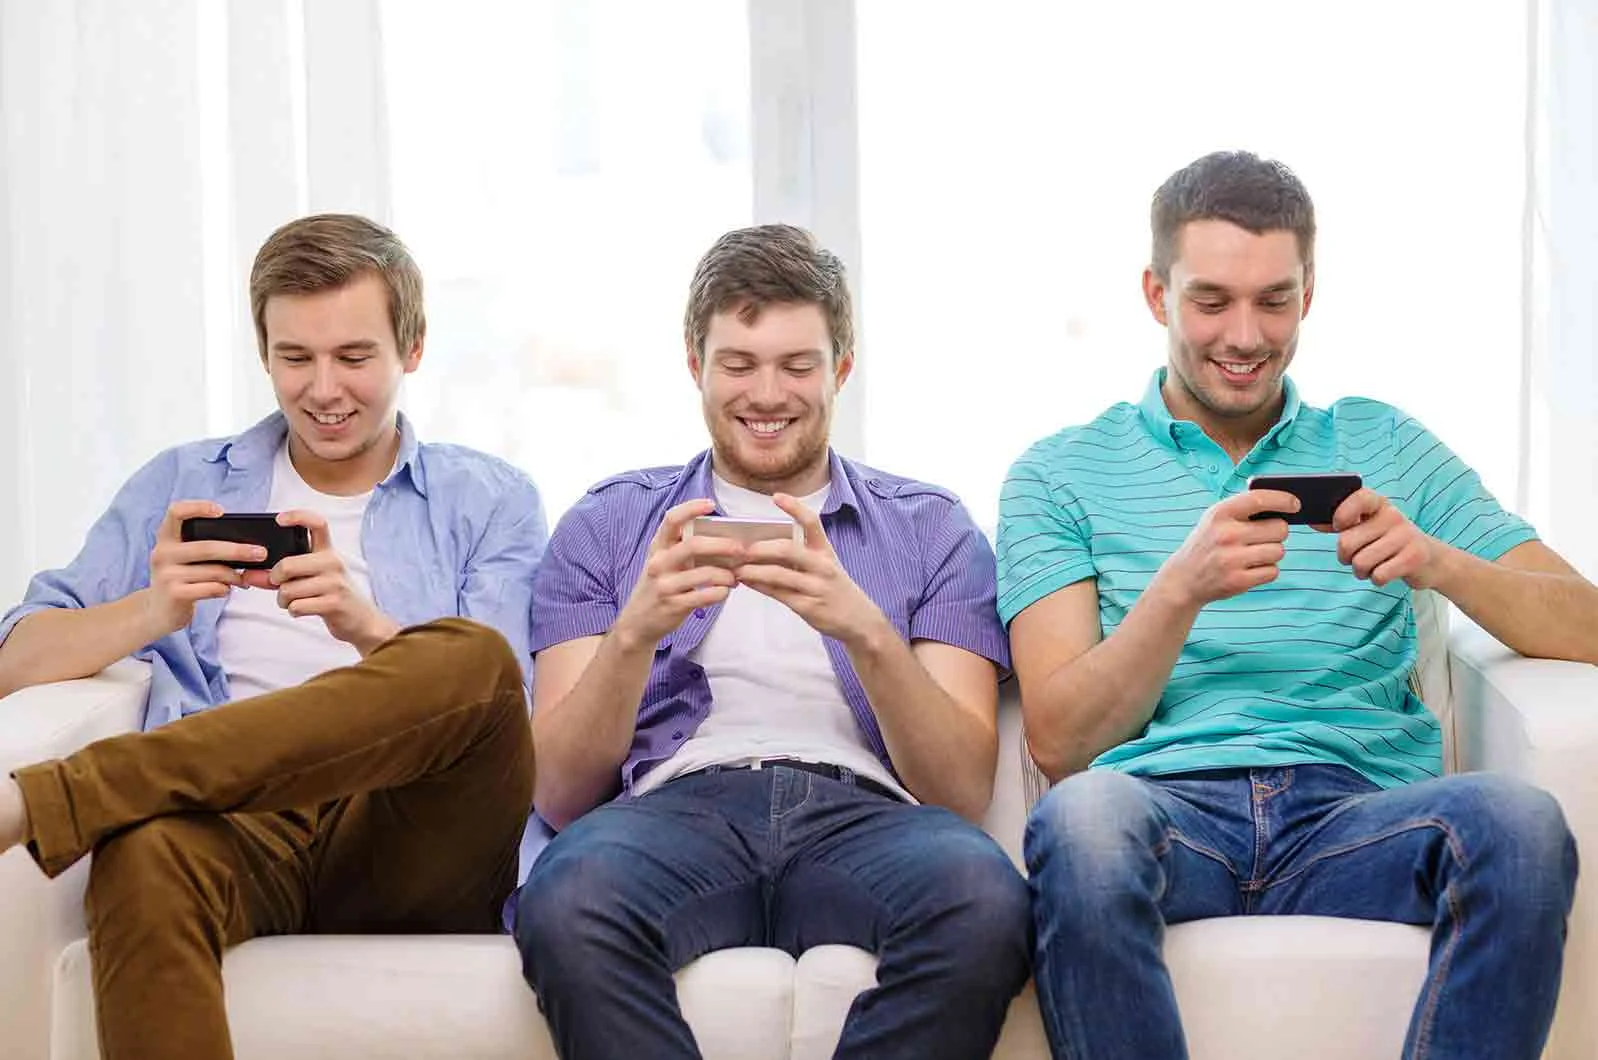 Three happy men playing video games with phones and wearing summer clothes. Concept of language translation and games localisation.